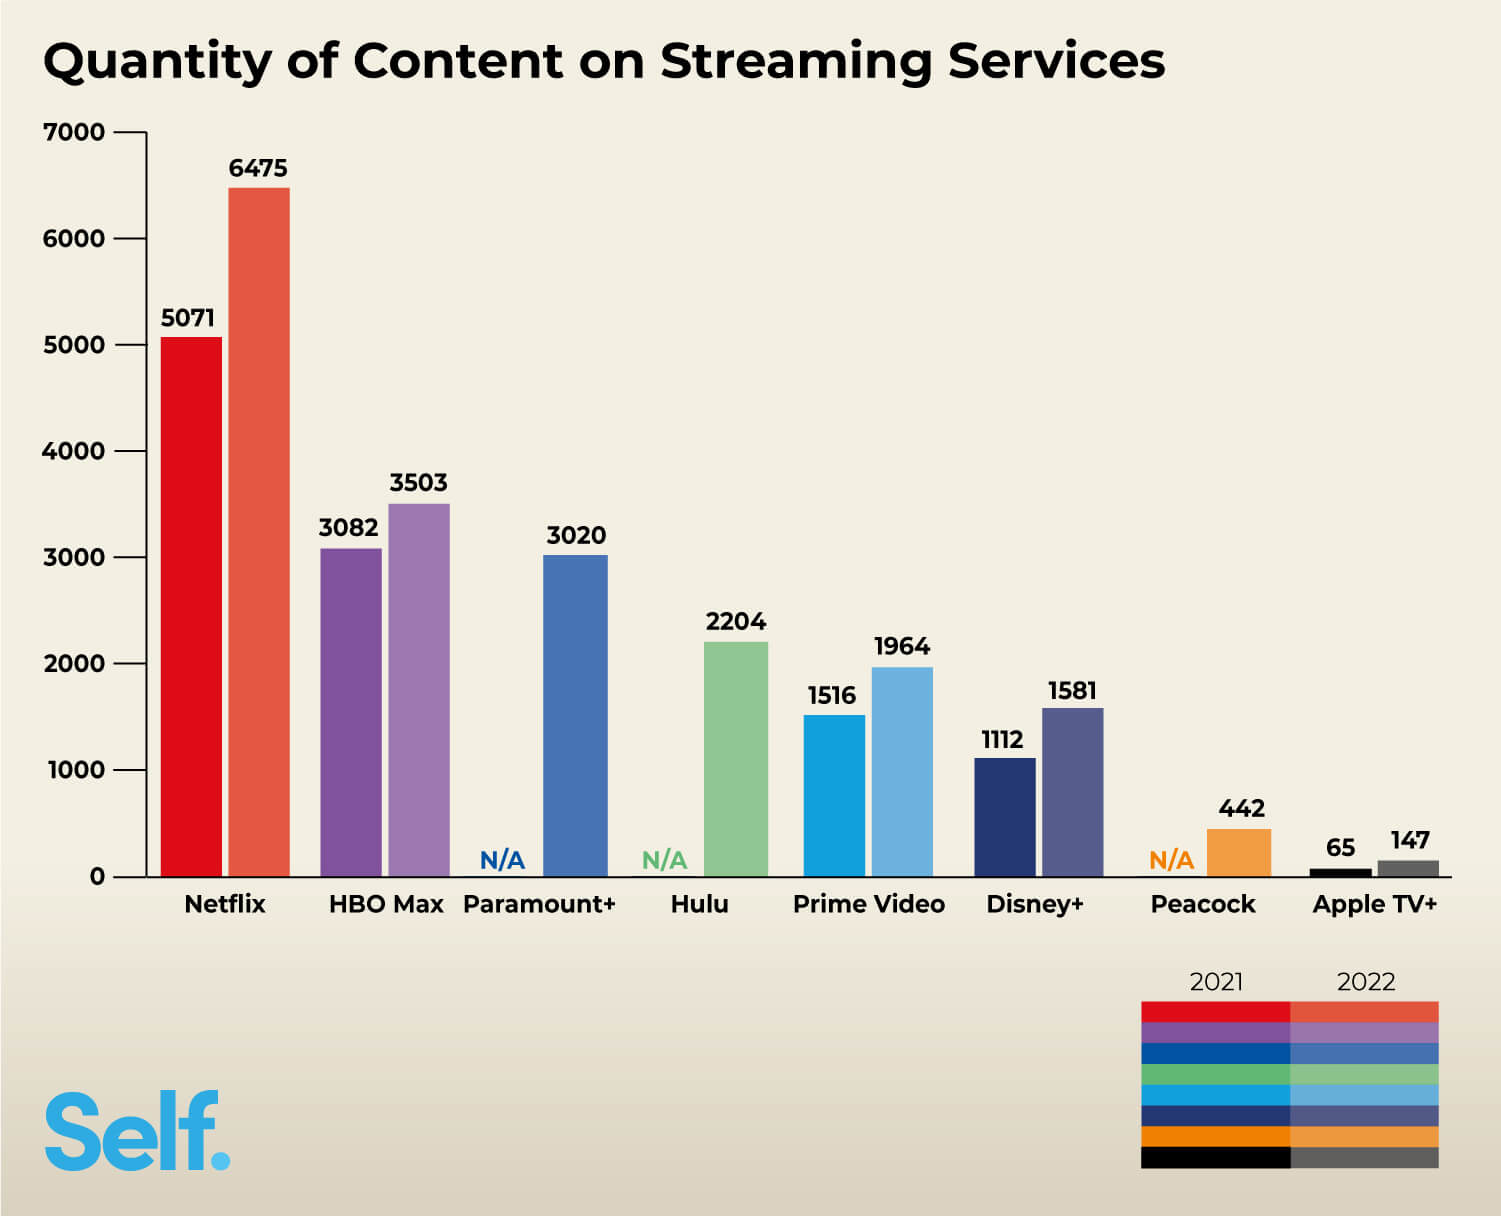 Quantity of content on streaming services